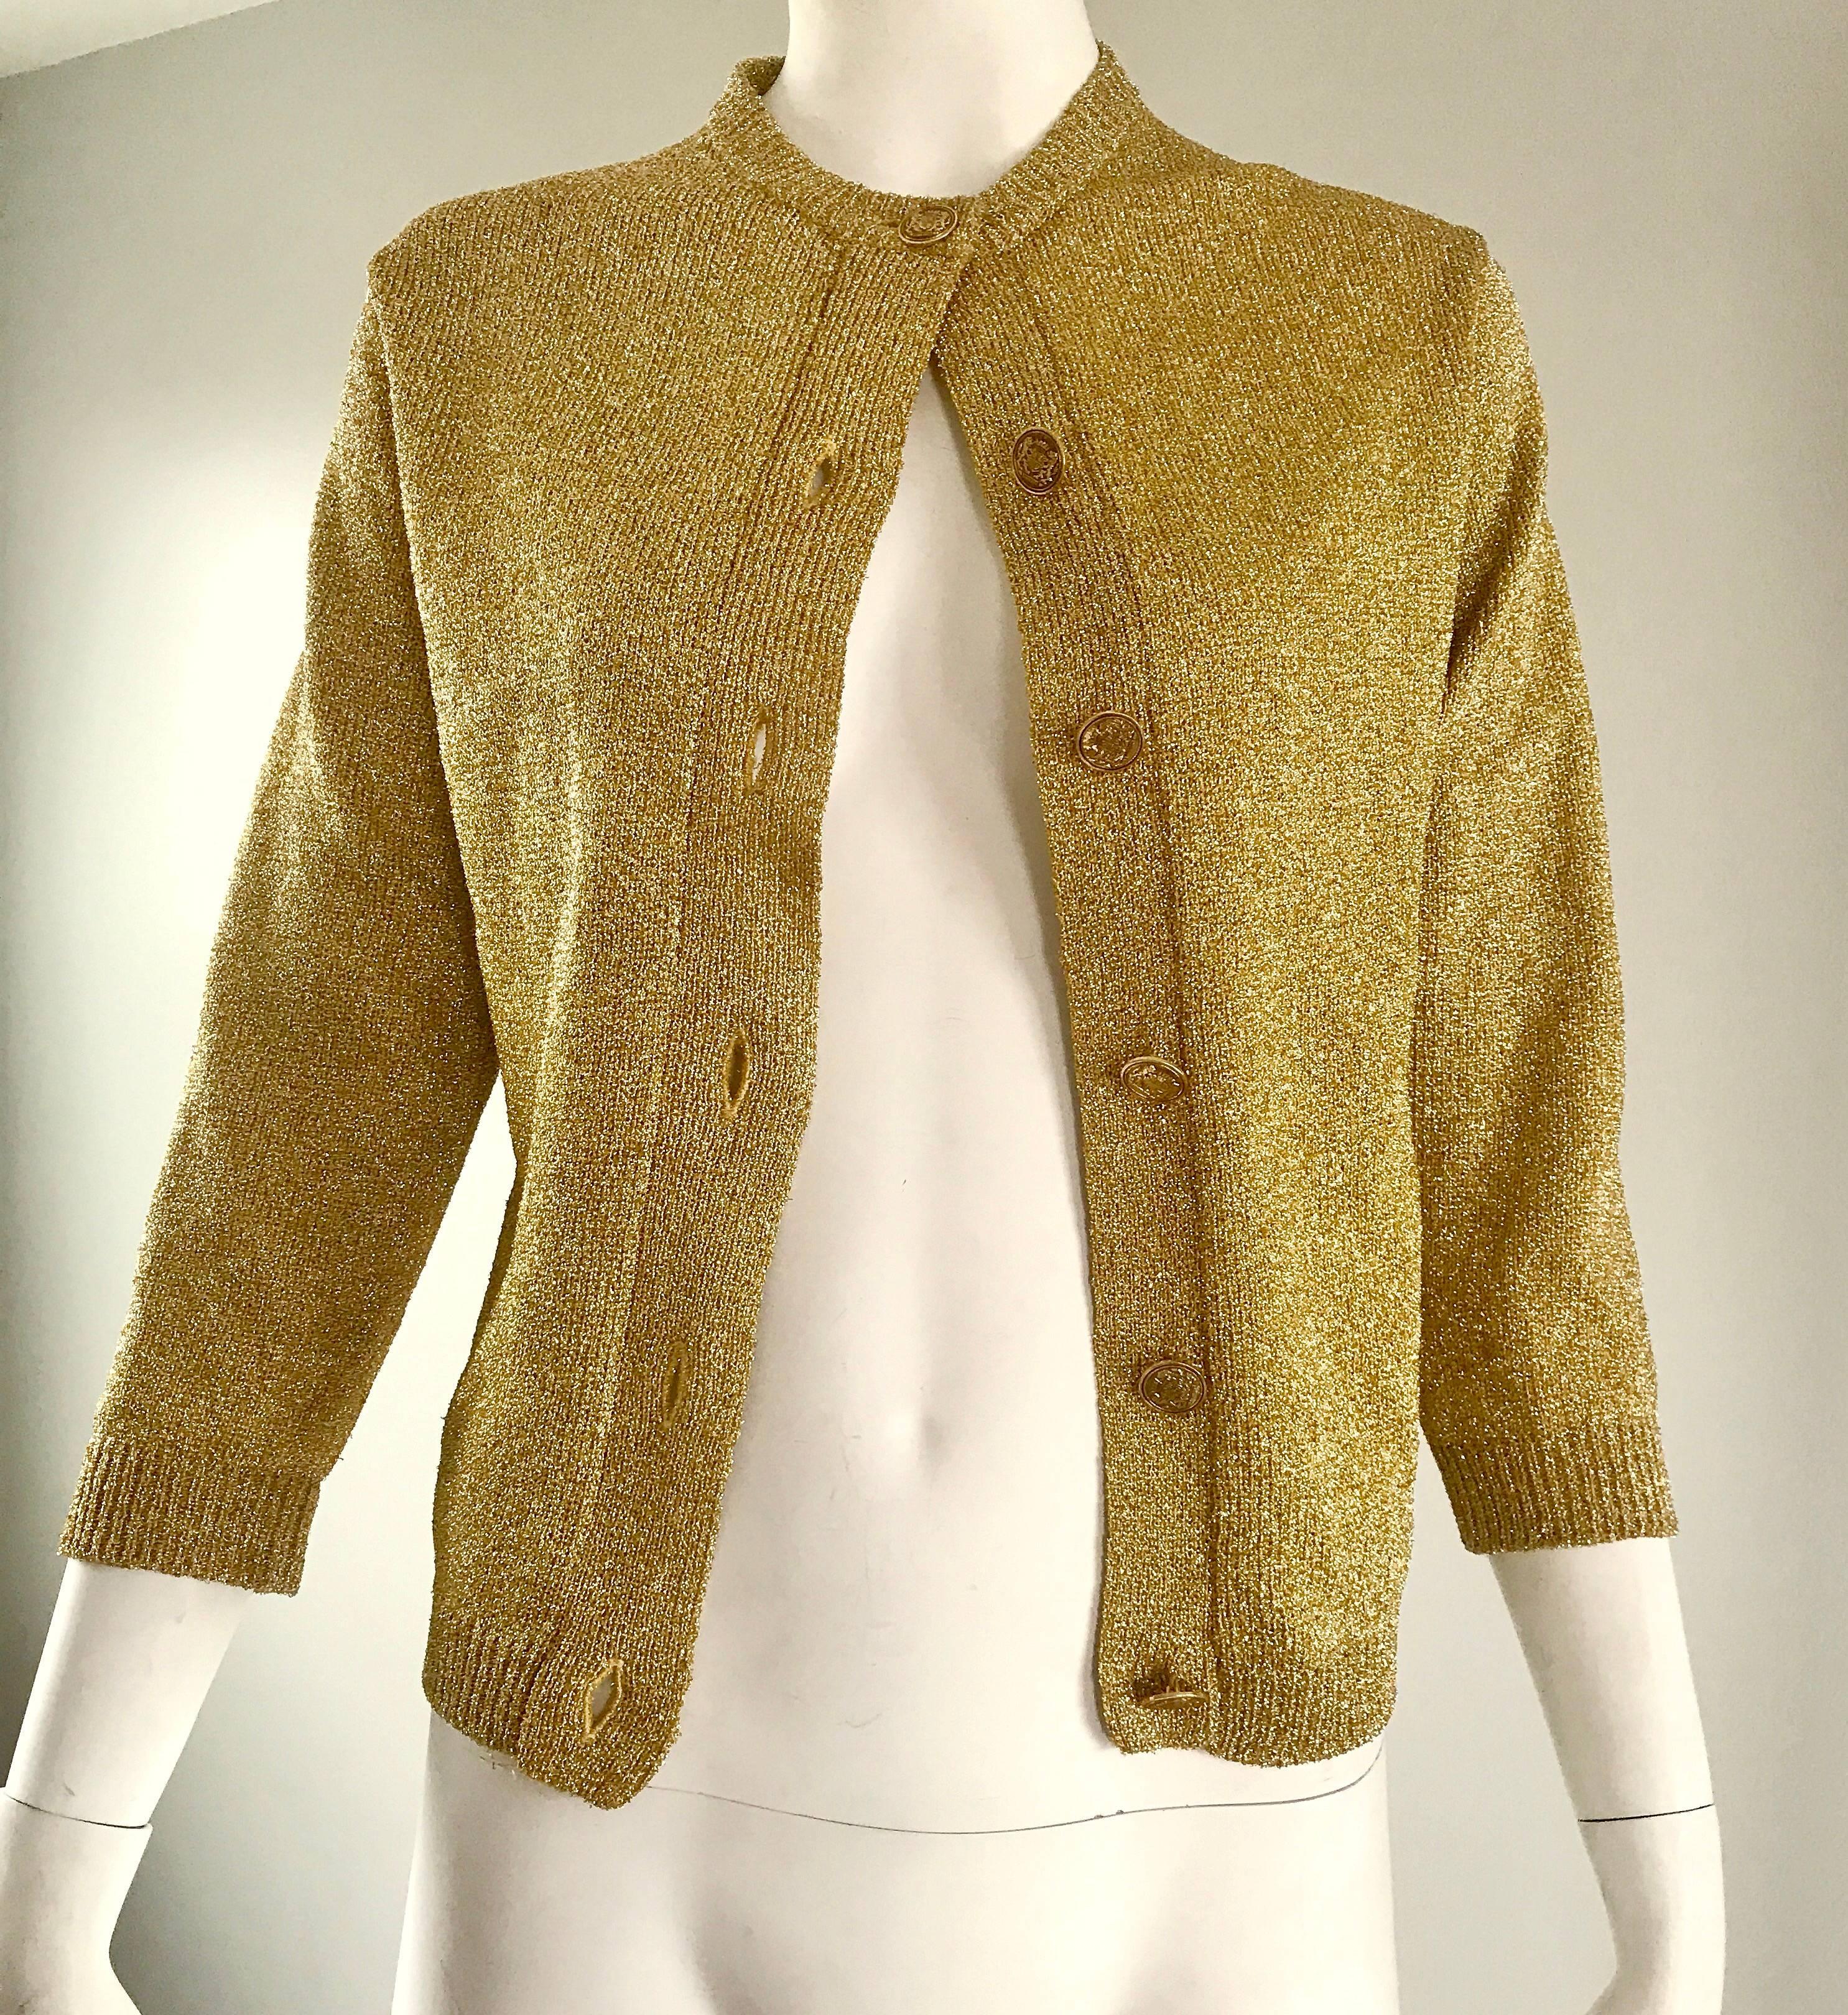 Brown 1950s Gold Metallic Lurex 3/4 Sleeves French Made Vintage 50s Cardigan Sweater For Sale